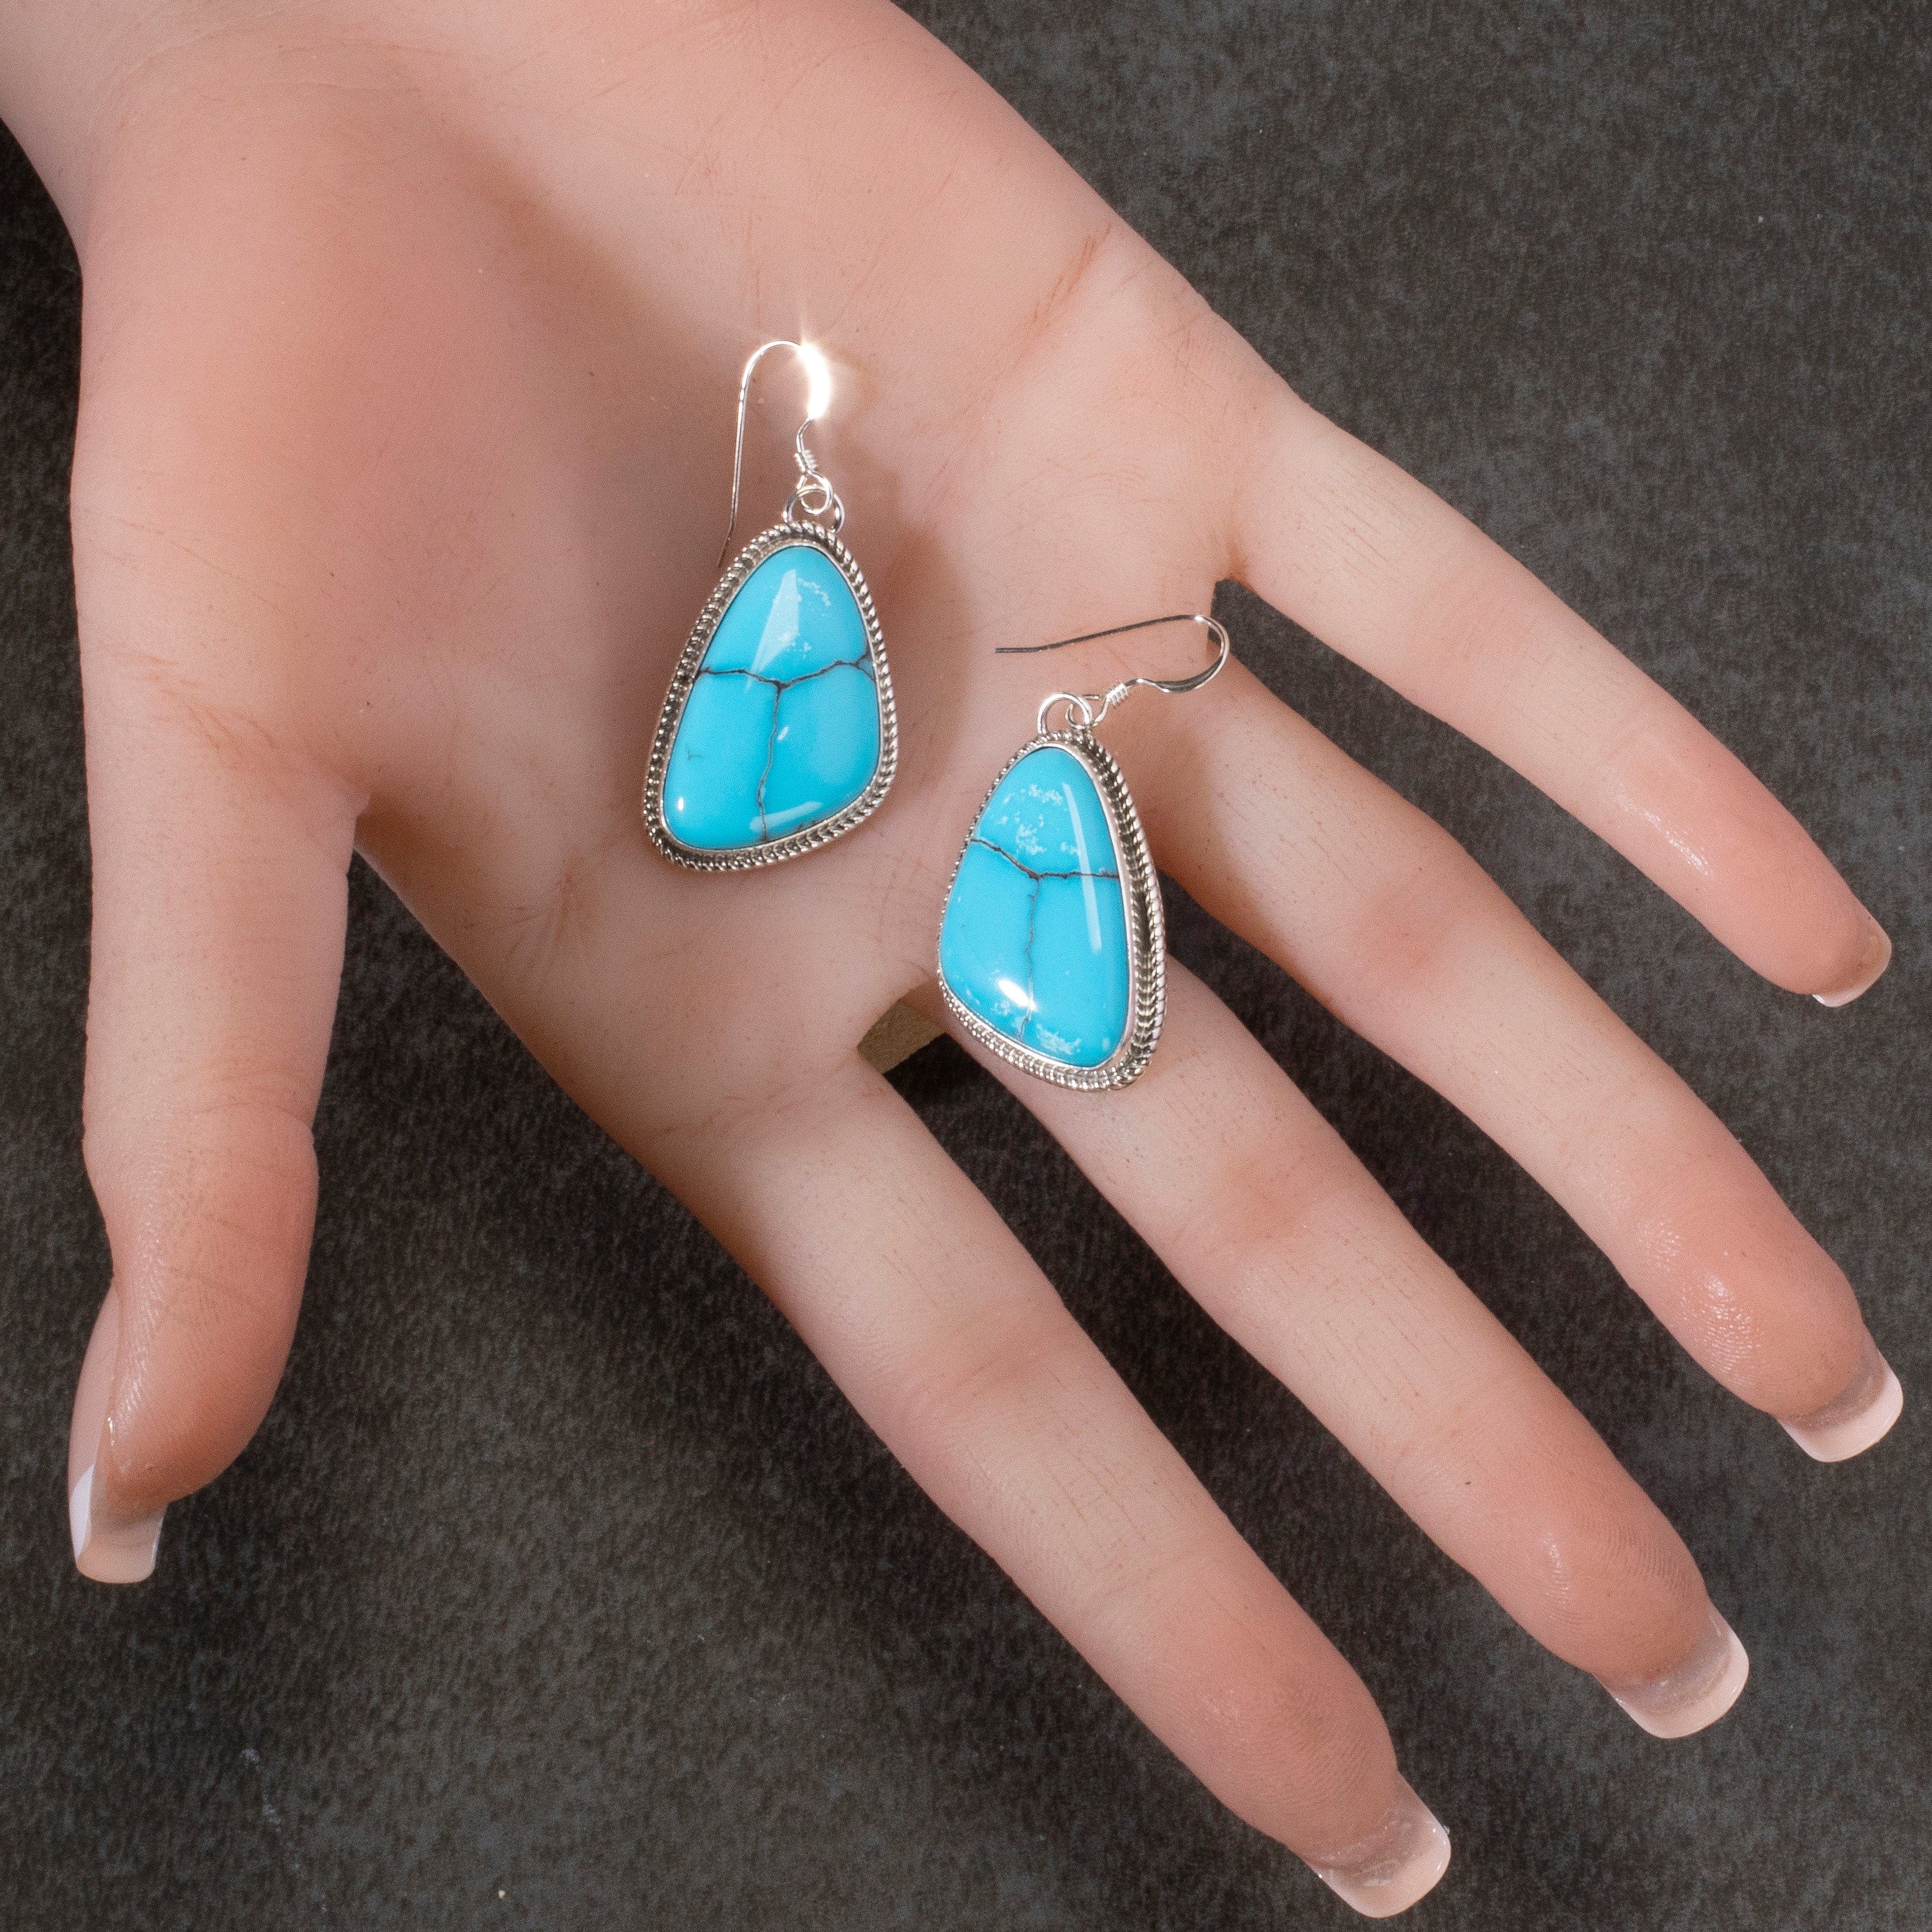 Kalifano Native American Jewelry Kingman Turquoise USA Native American Made 925 Sterling Silver Dangly Earrings with French Hook NAE600.017